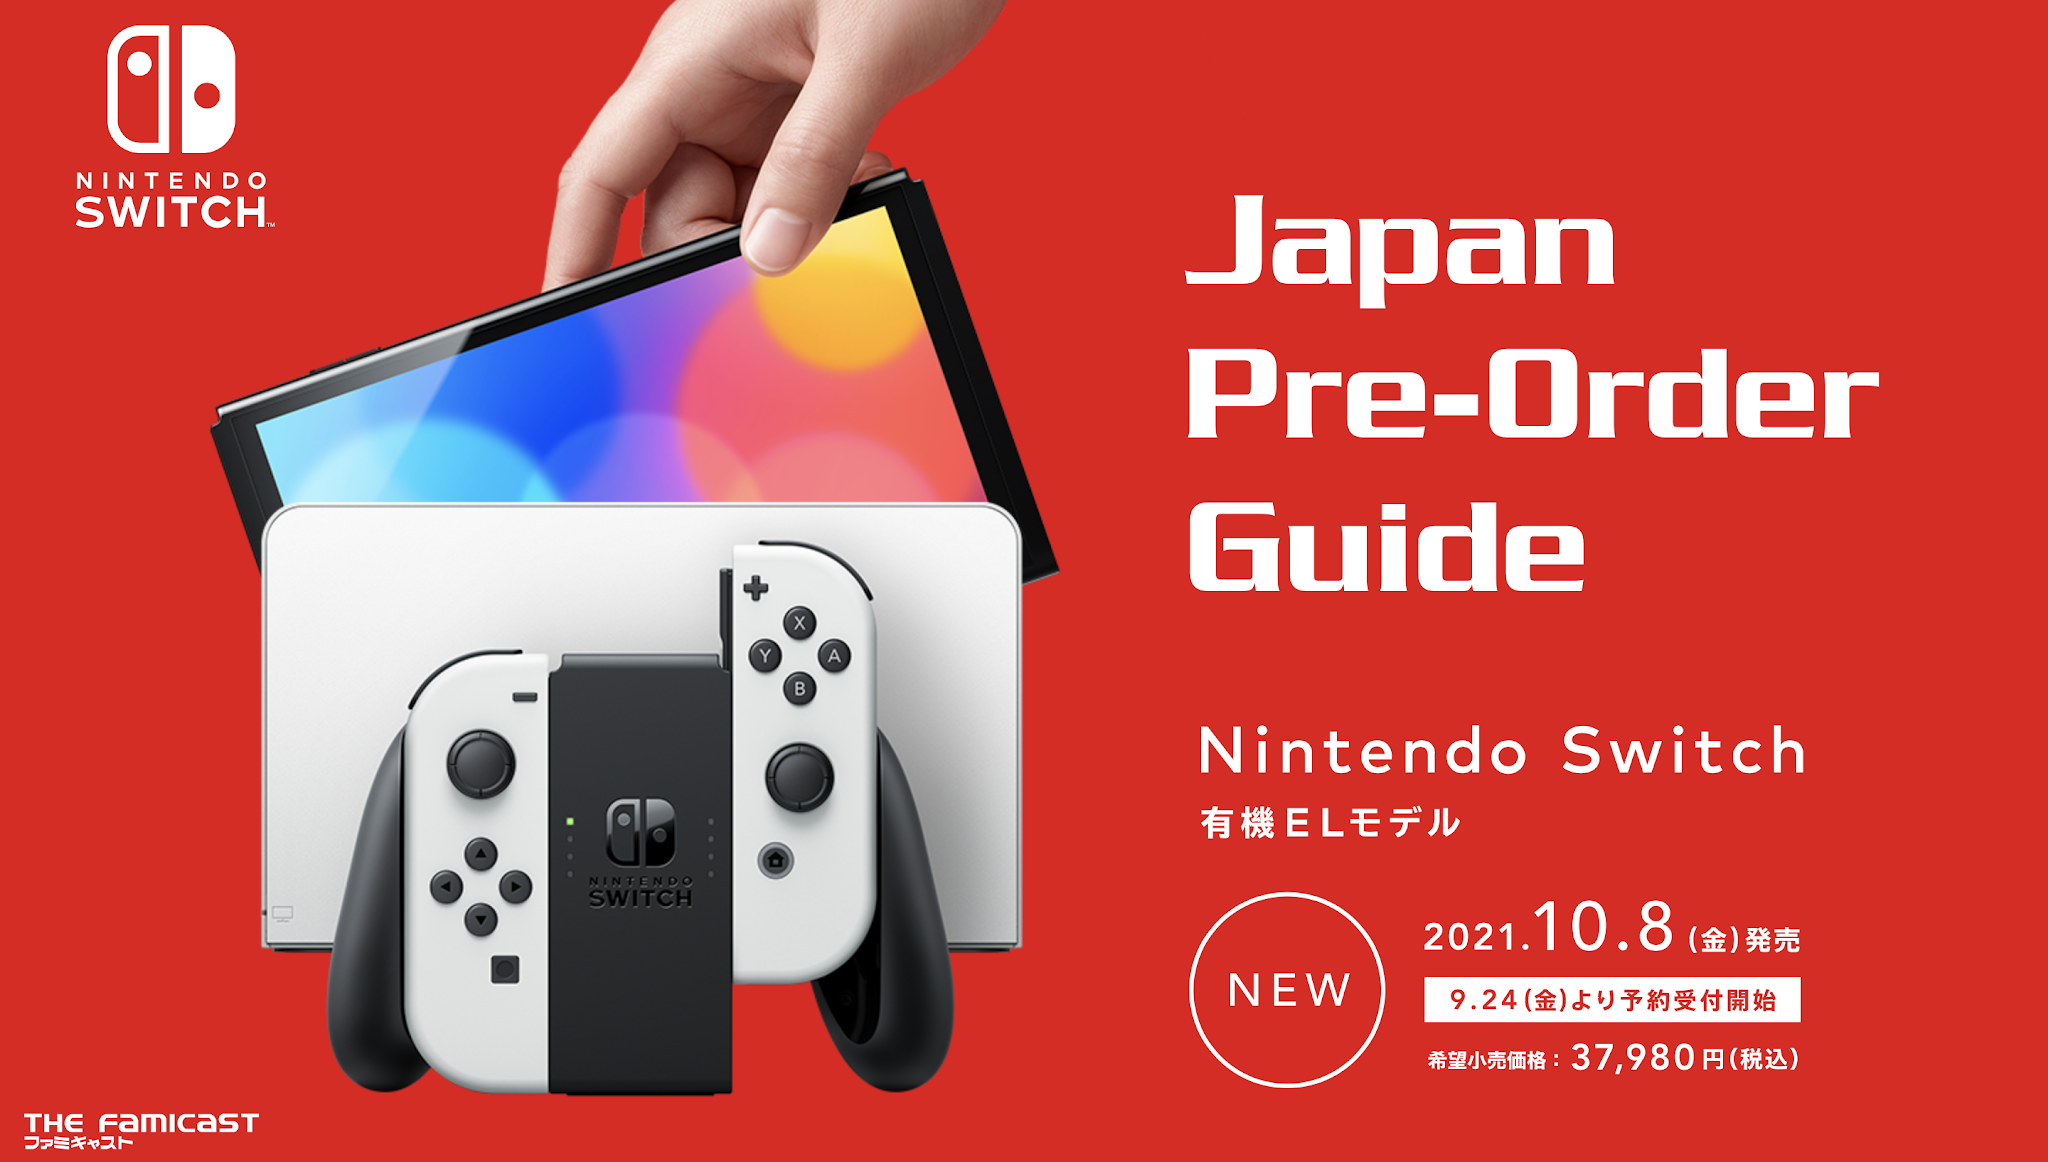 Switch OLED Model Japan Guide - Japan-based Nintendo Podcasts, & Reviews!